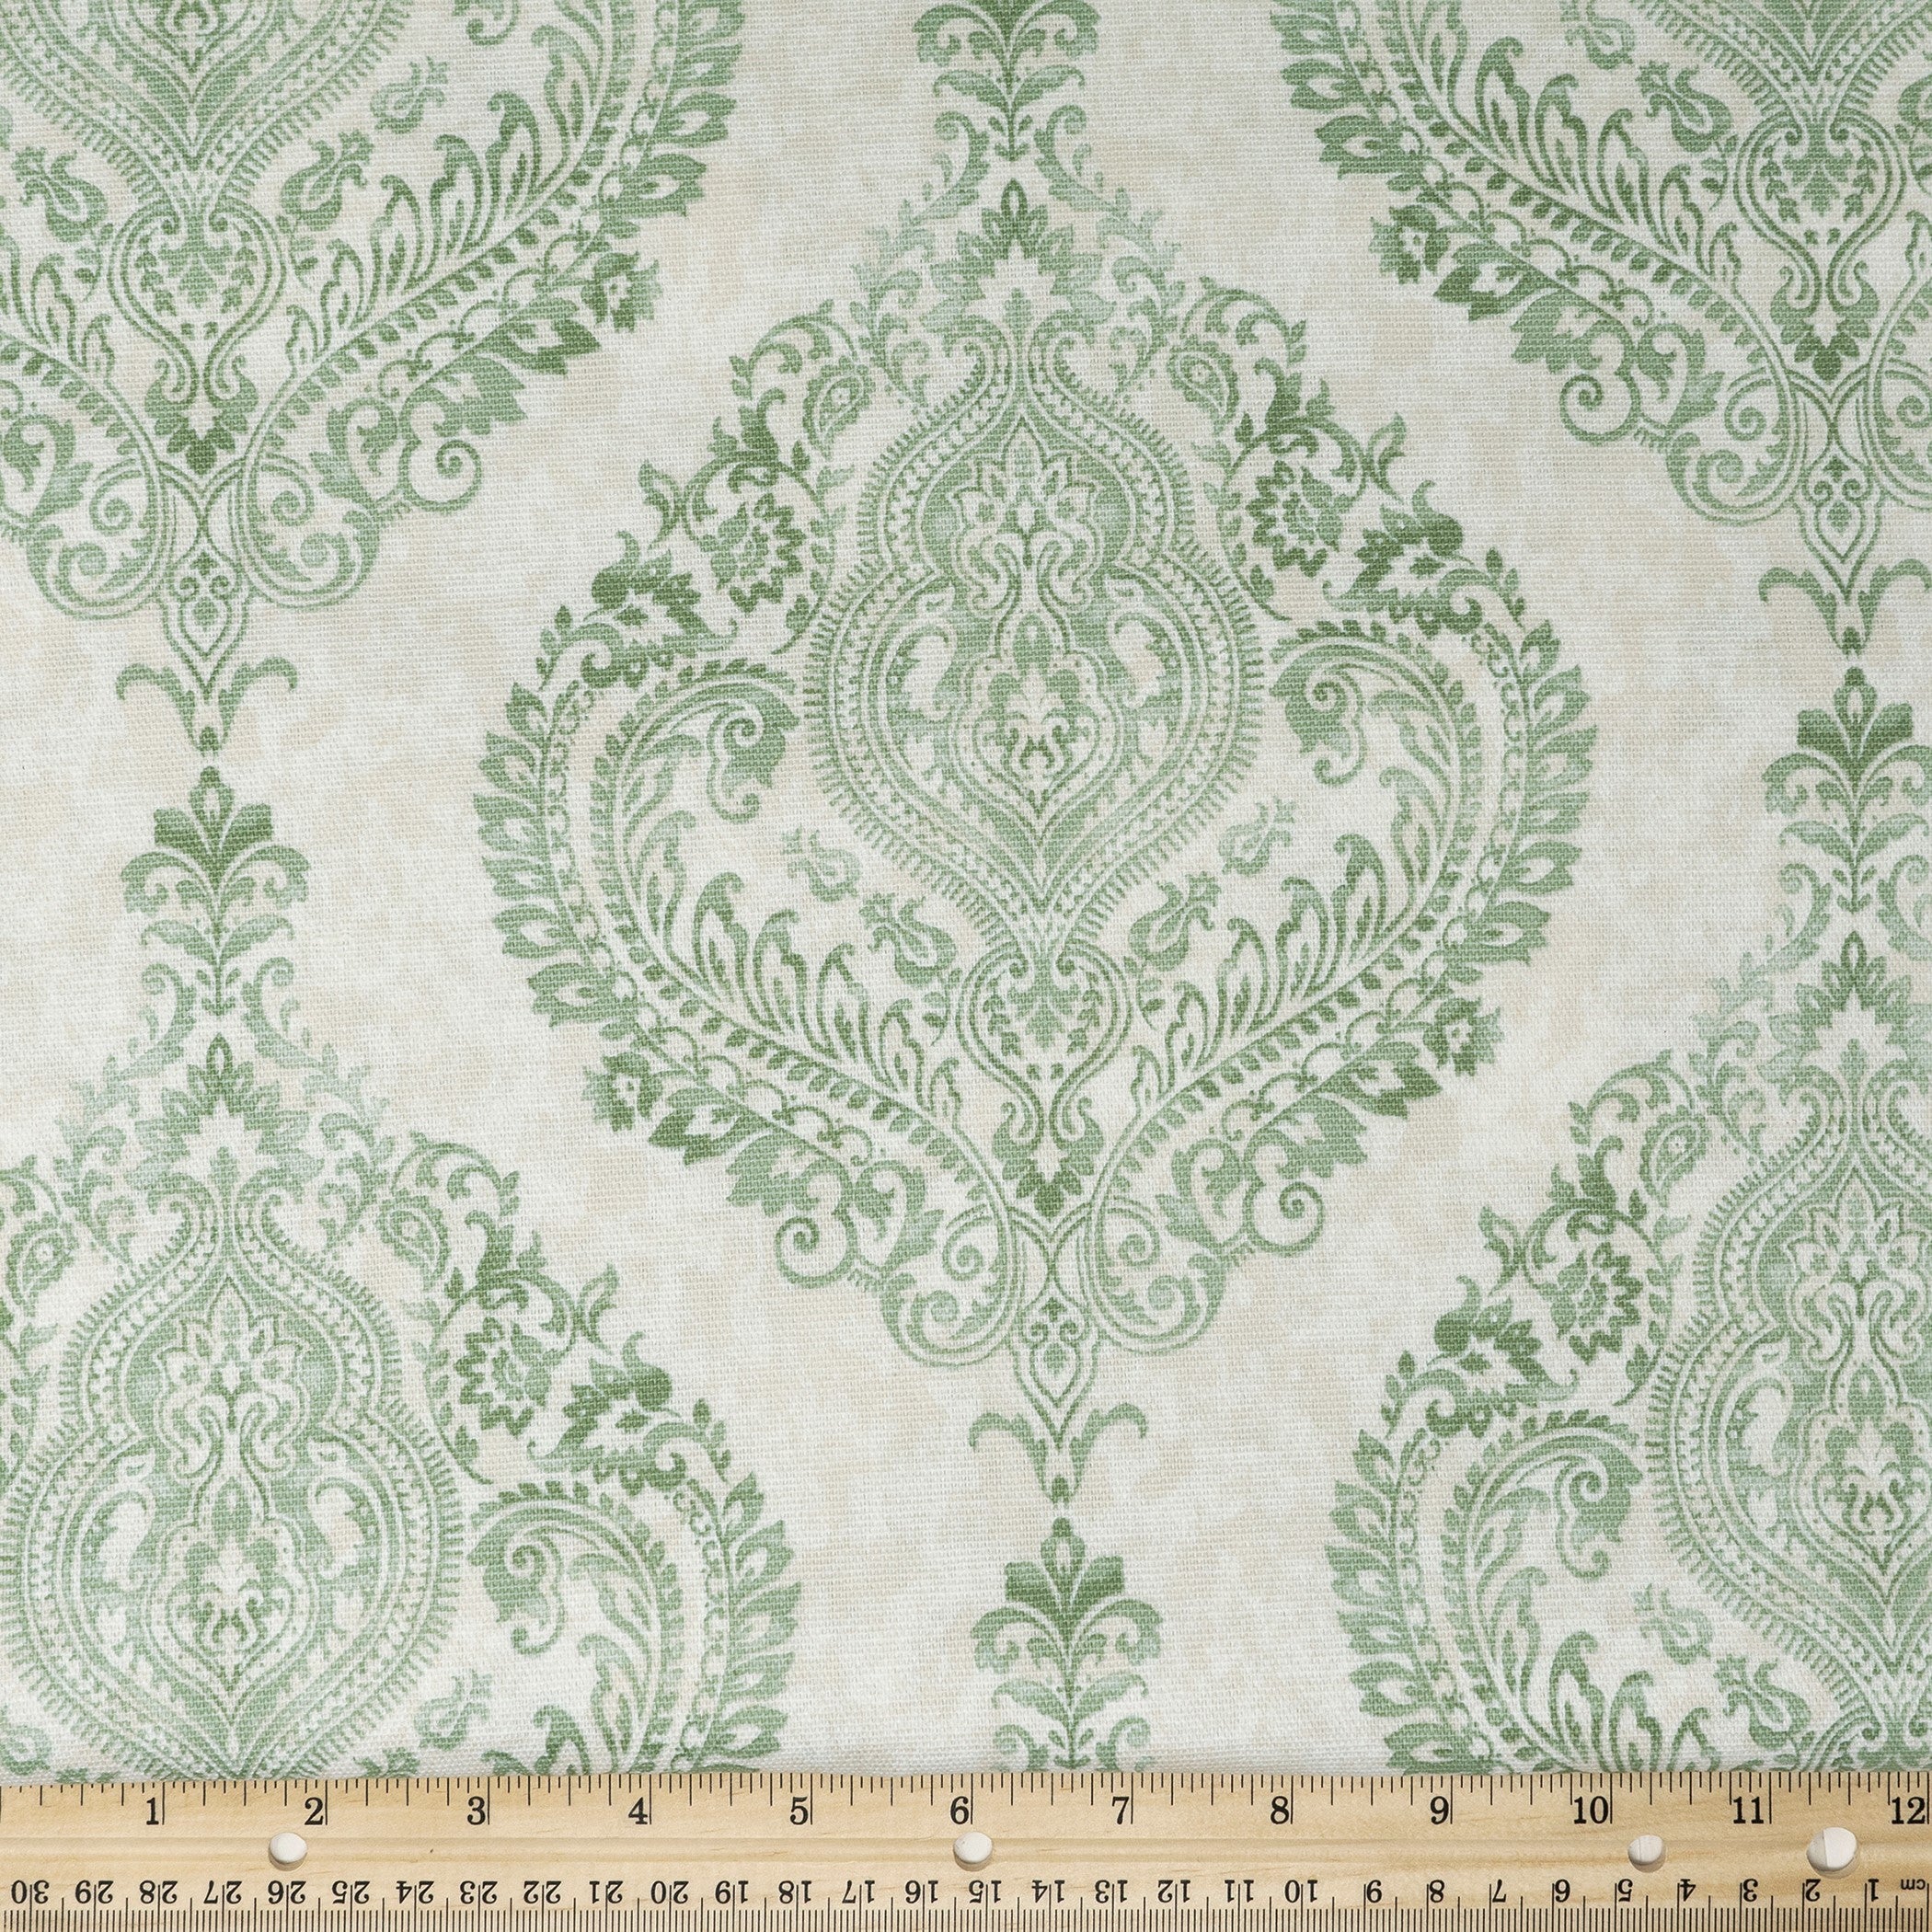 Waverly Inspirations 100% Cotton Duck 45" Width Long Damask Spa Color Sewing Fabric by the Yard